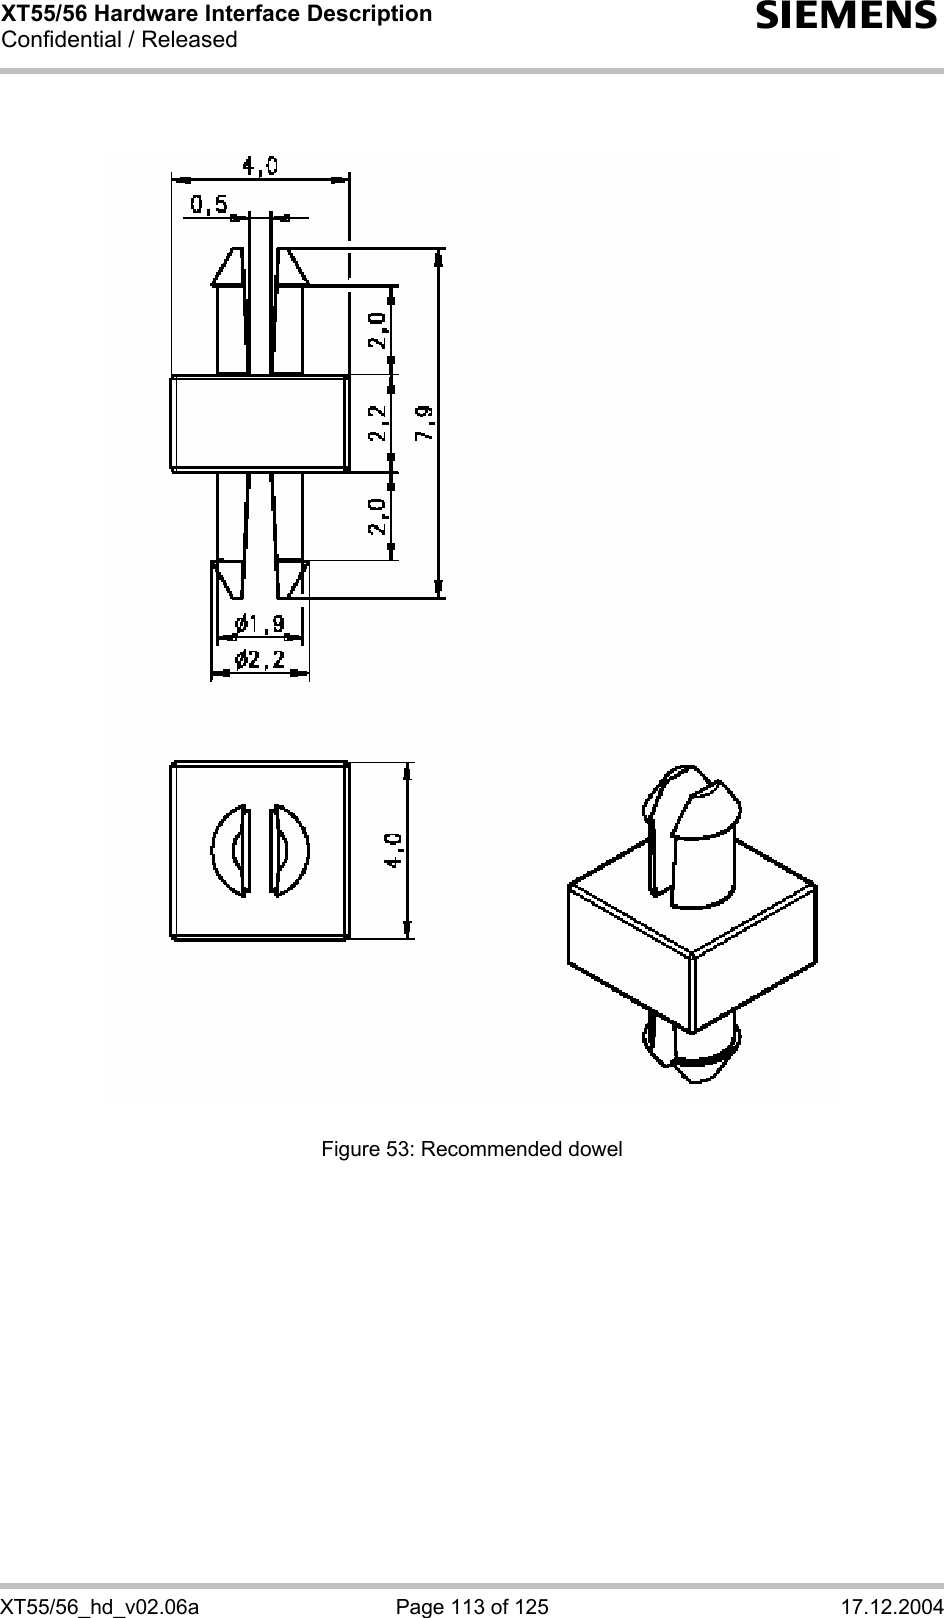 XT55/56 Hardware Interface Description Confidential / Released s XT55/56_hd_v02.06a  Page 113 of 125  17.12.2004                                        Figure 53: Recommended dowel  